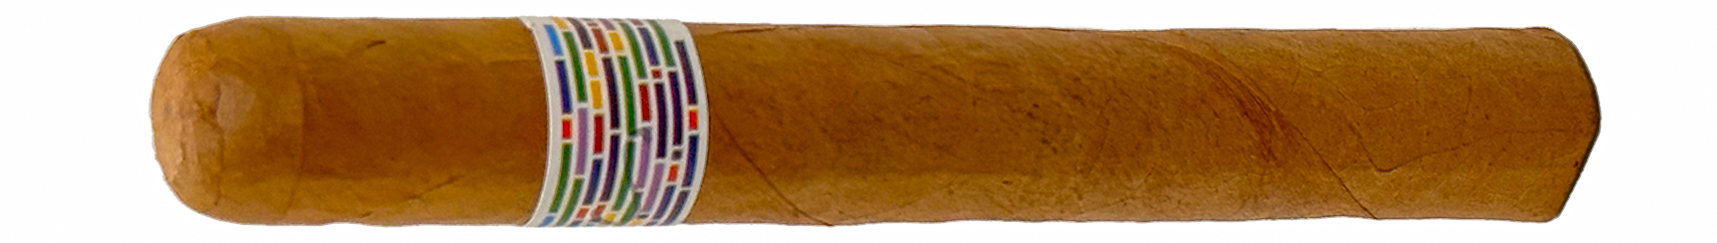 An image of Ozgener family cigars' Ecuadorian Connecticut blend, featuring a smooth and creamy taste.